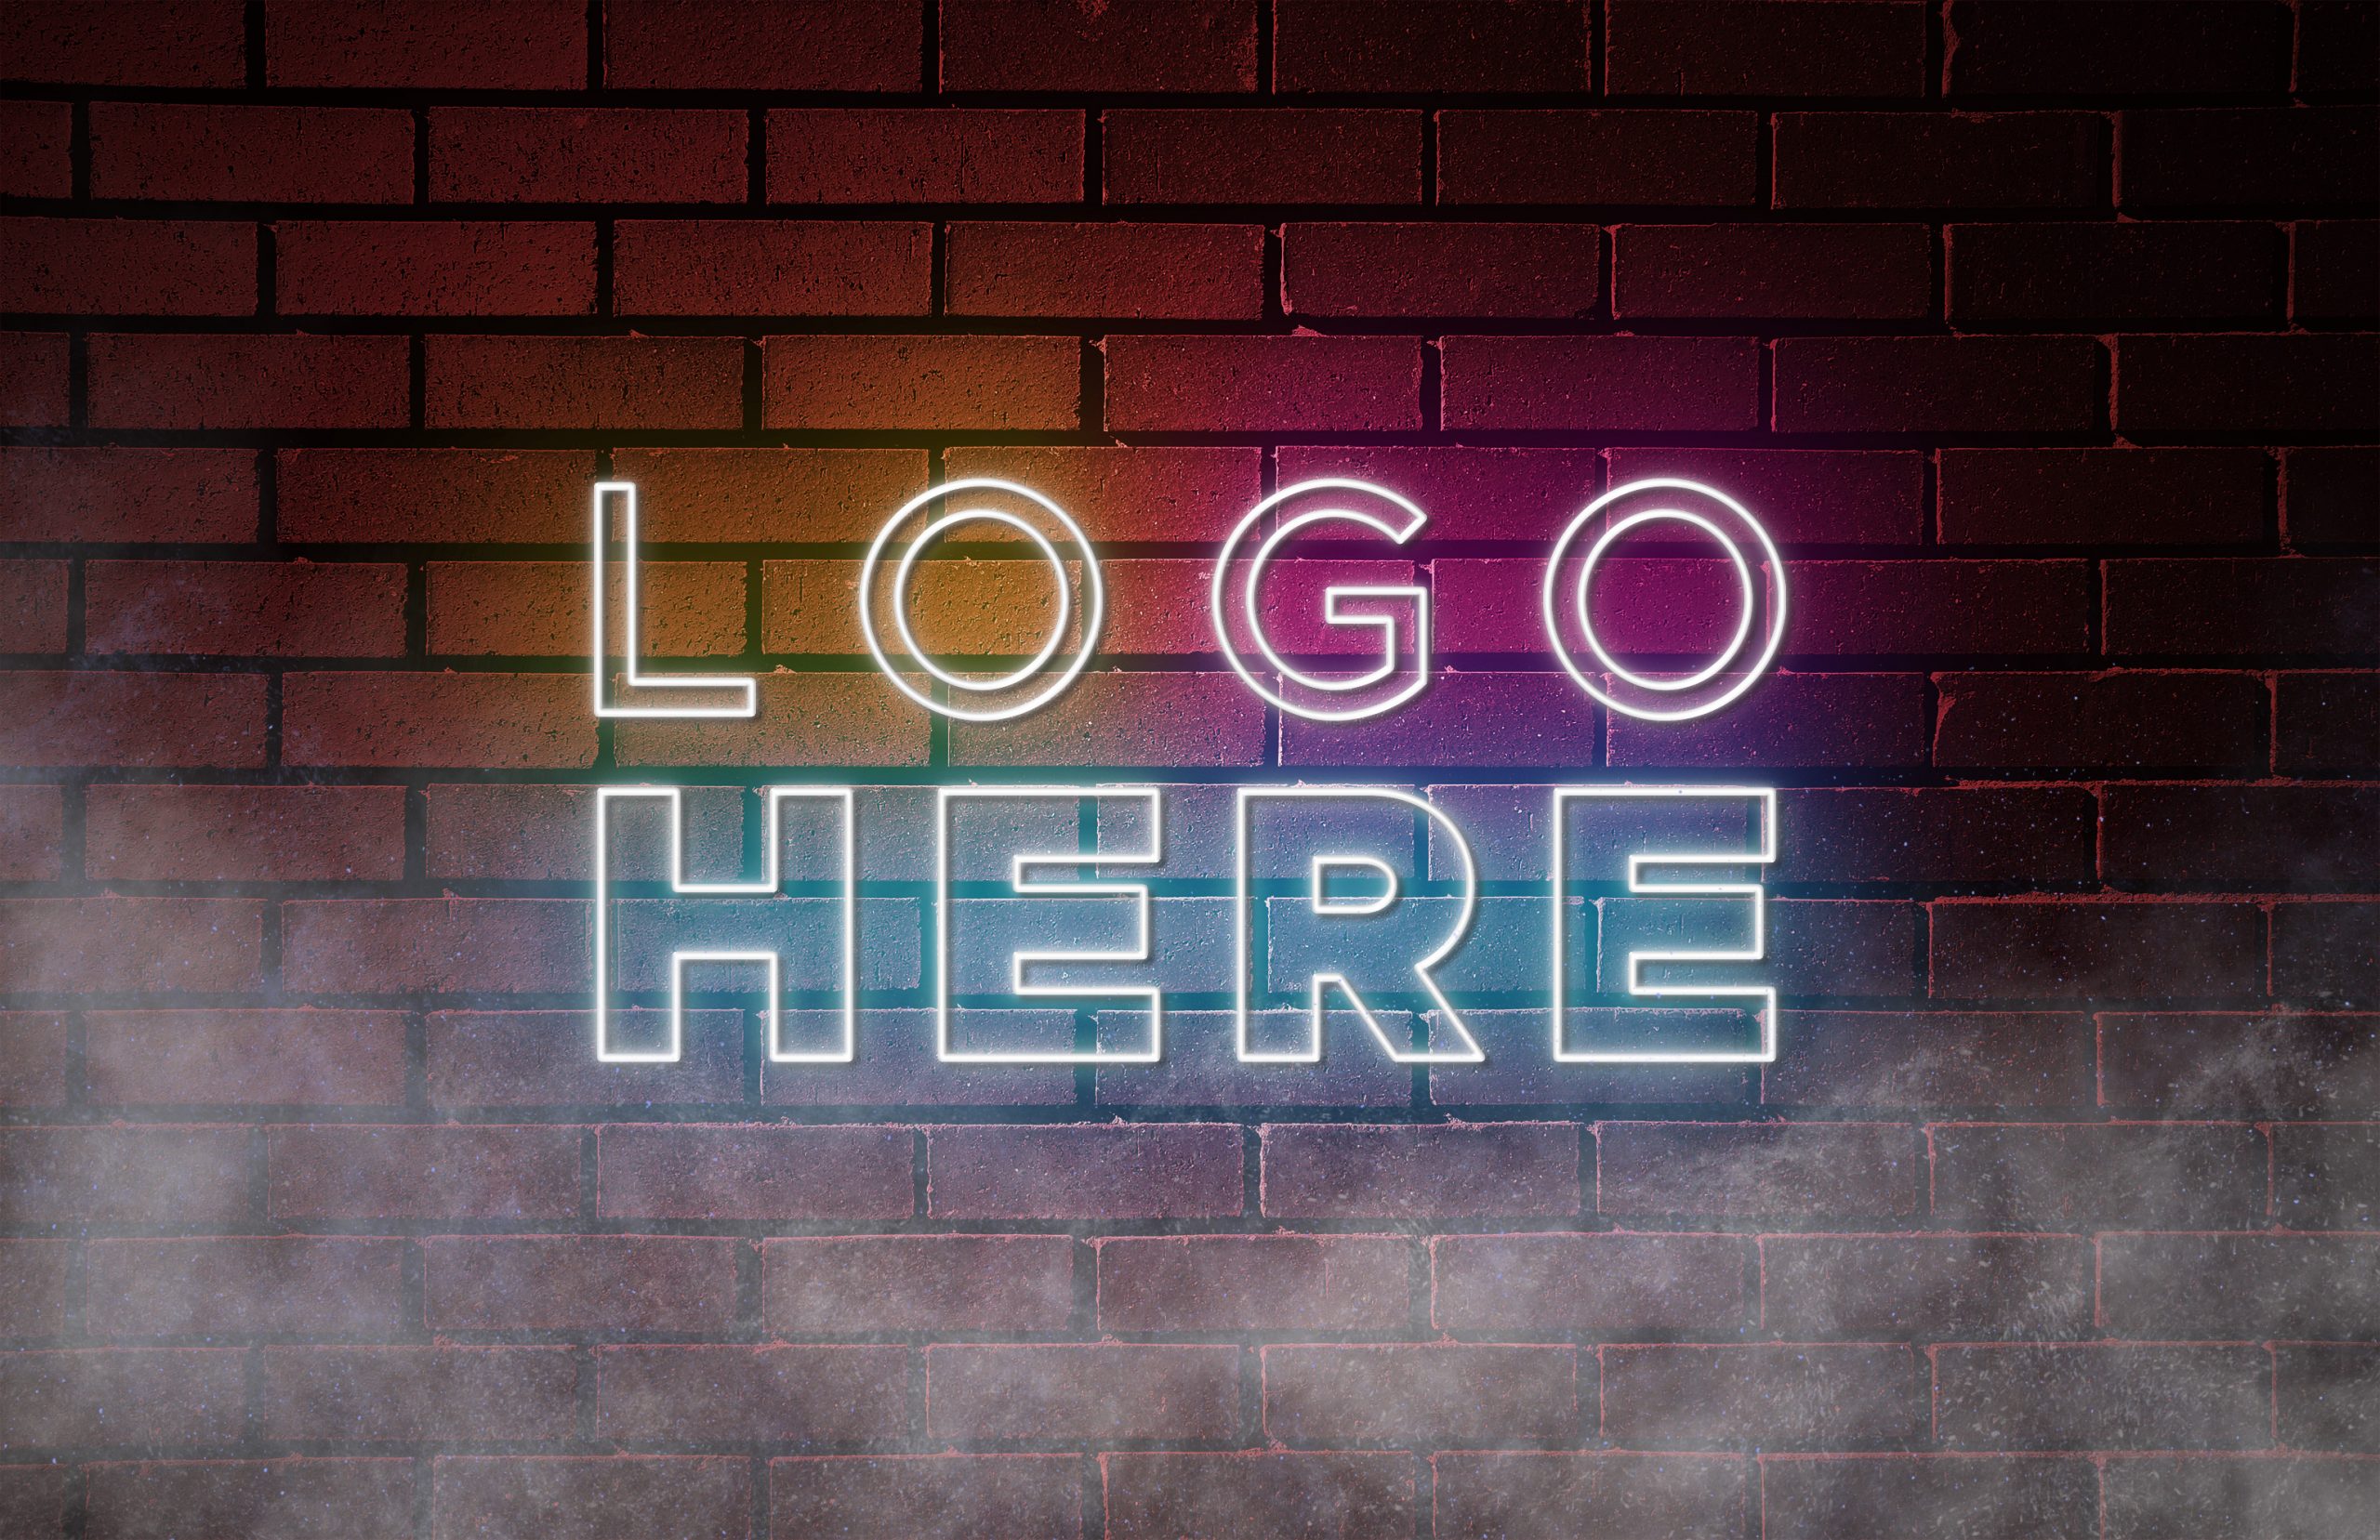 Musica Neon Mockups Free - Free Neon Logo Mockup - You can use these files for promoting your ...